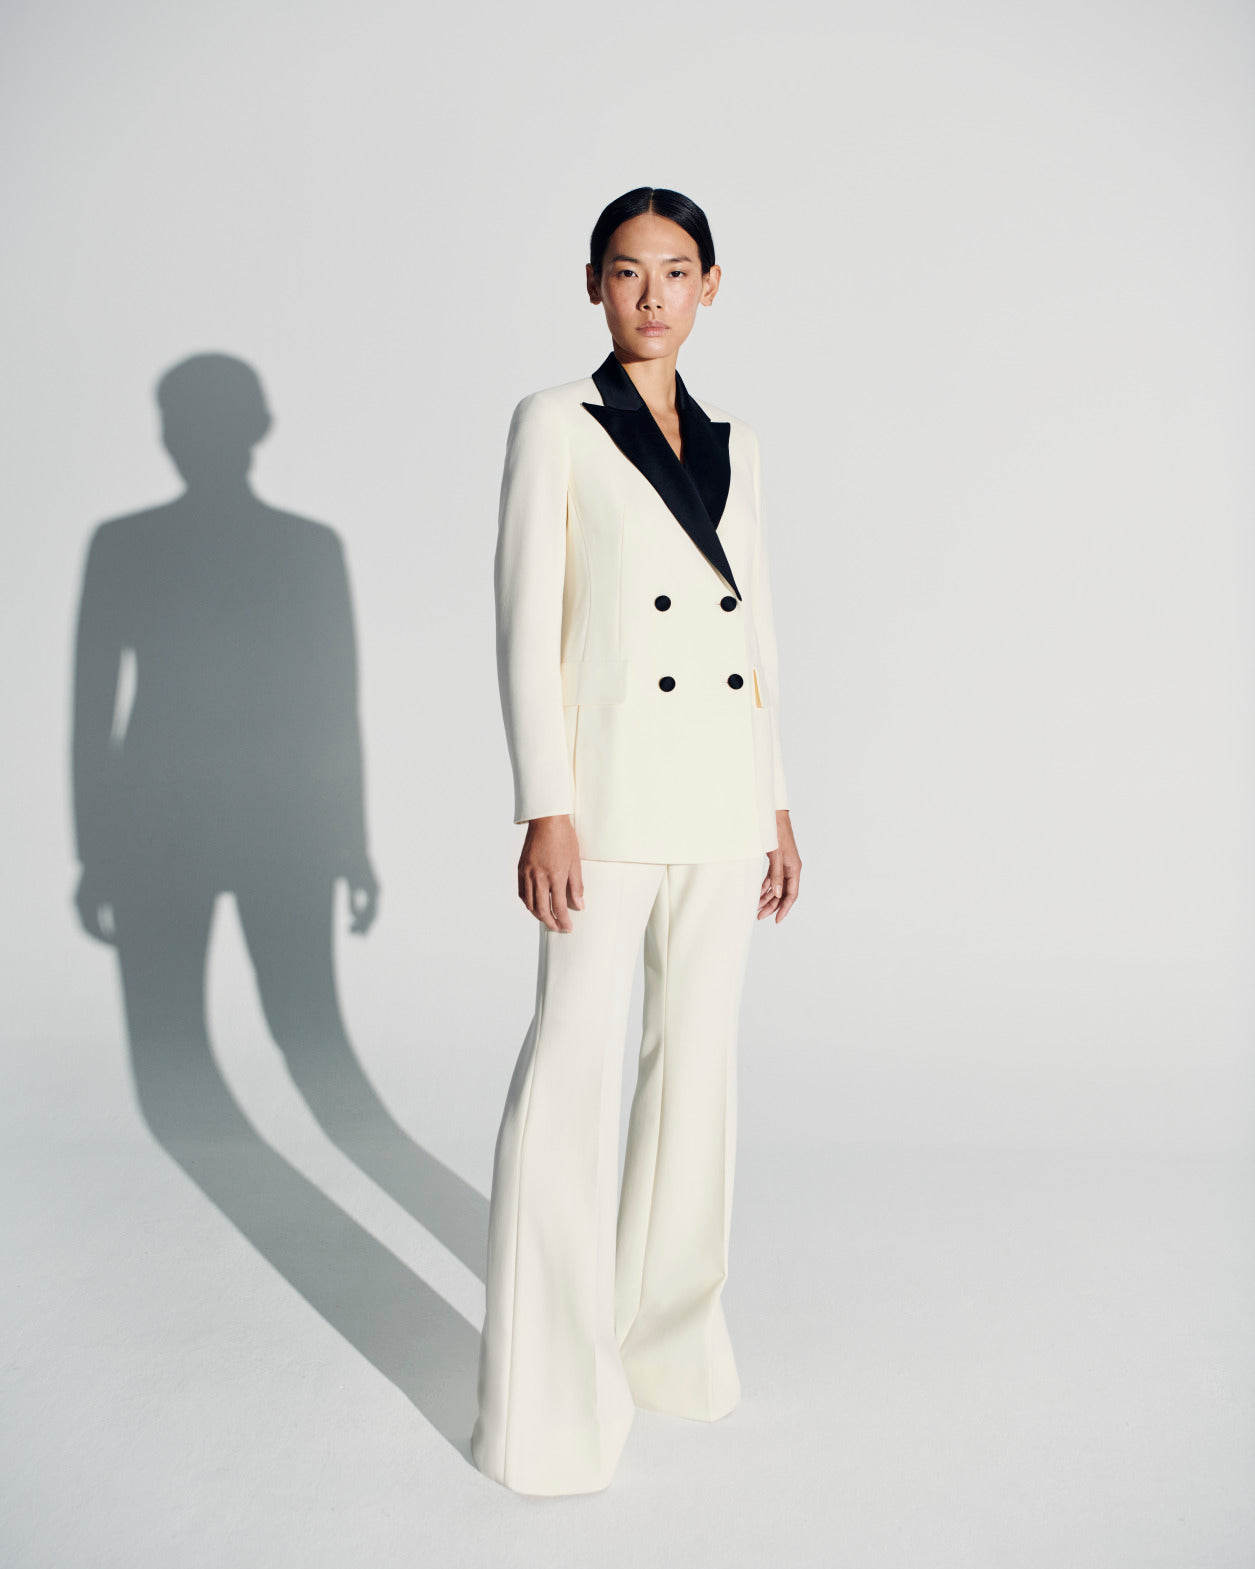 An Asian model poses in an elegant ecru pantsuit by Akris with a black collar.